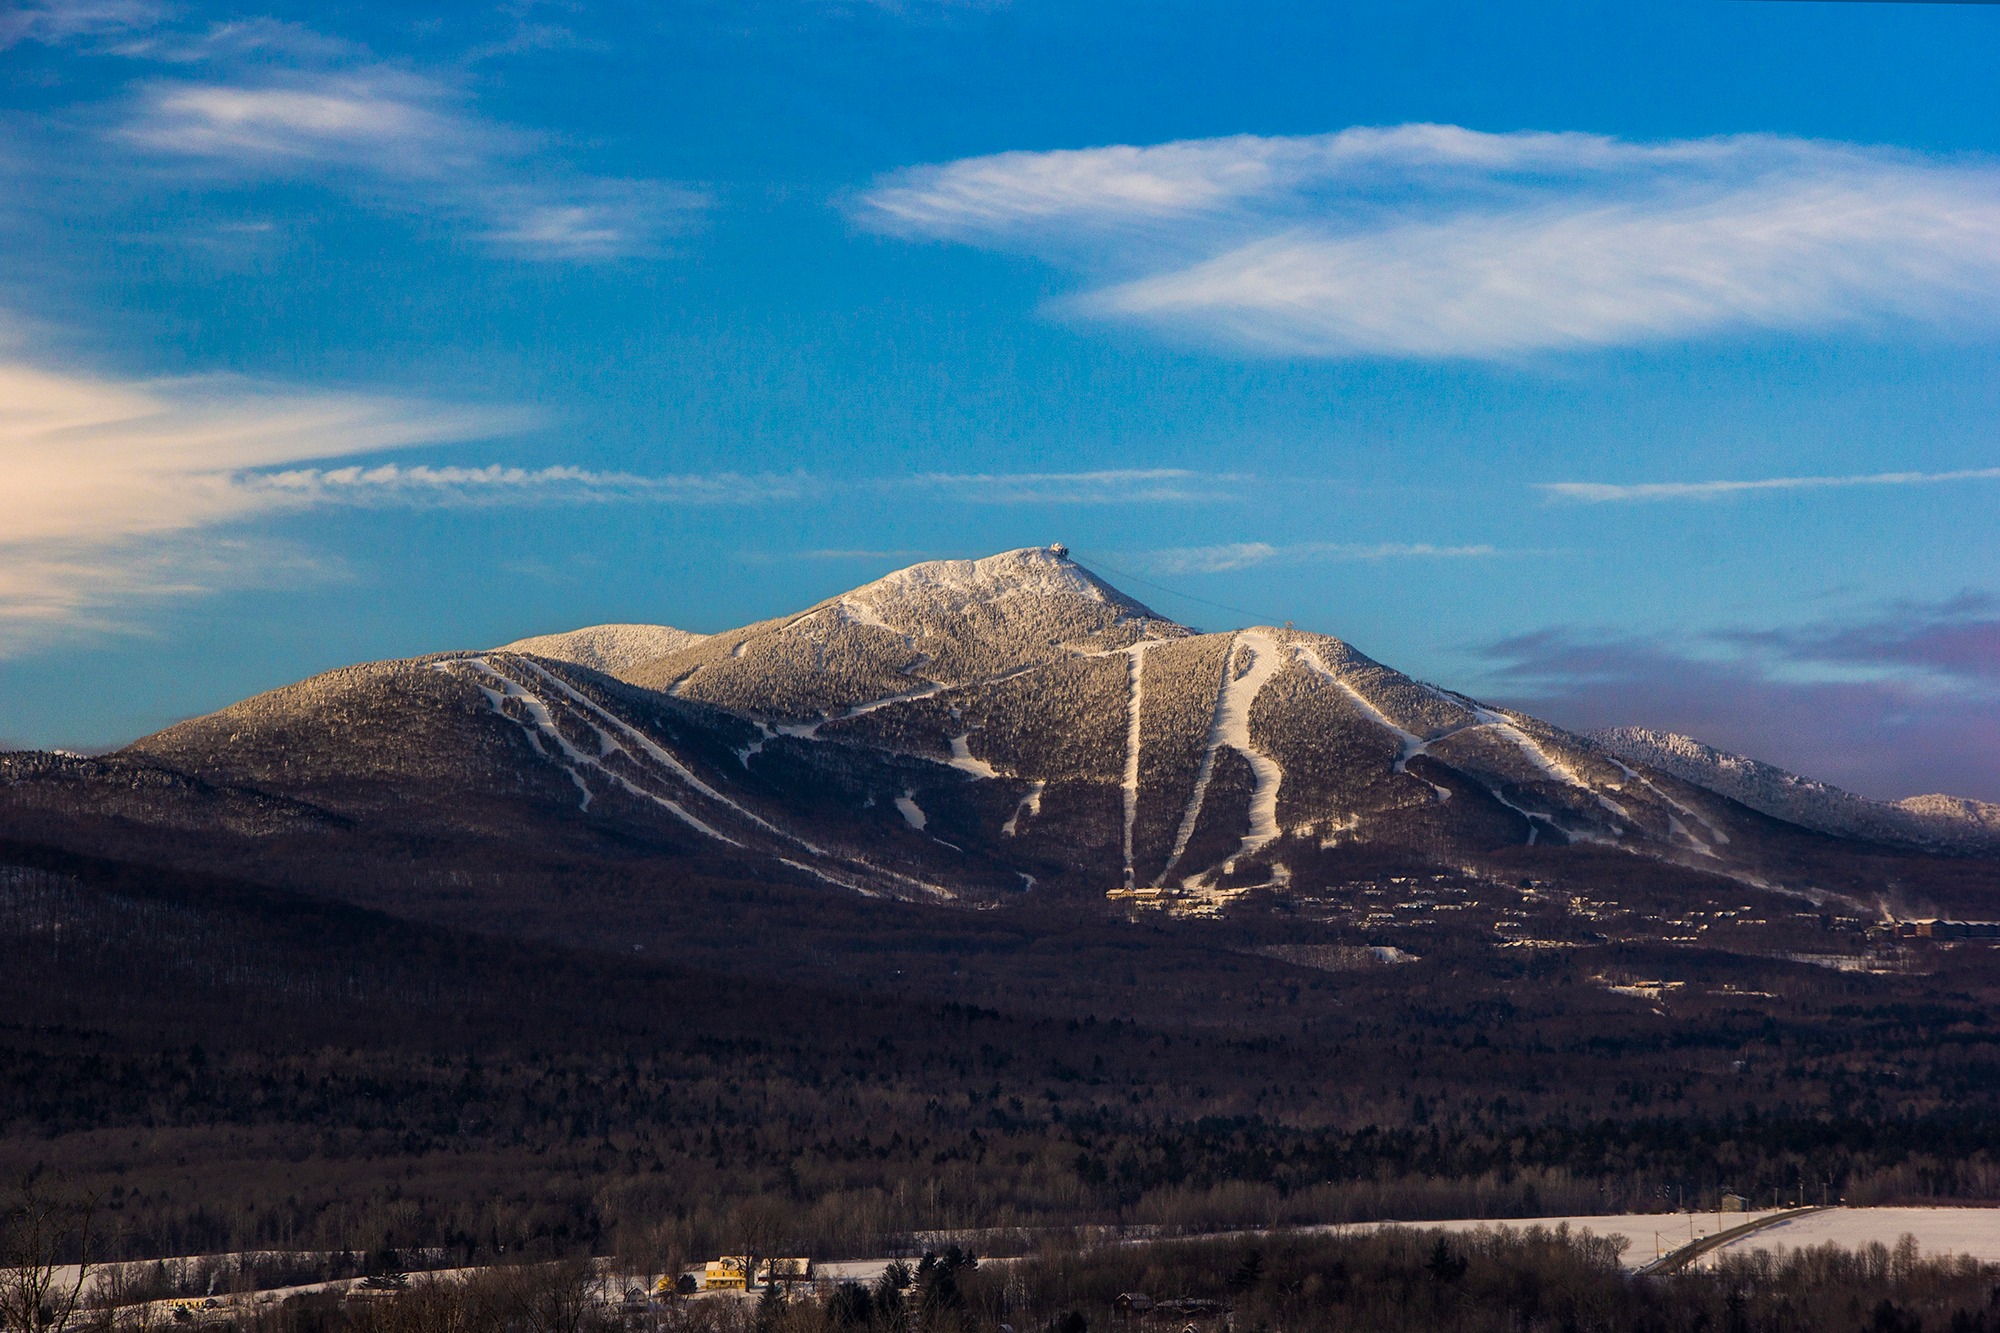 Jay Peak's President Discusses The Future Of The Mountain